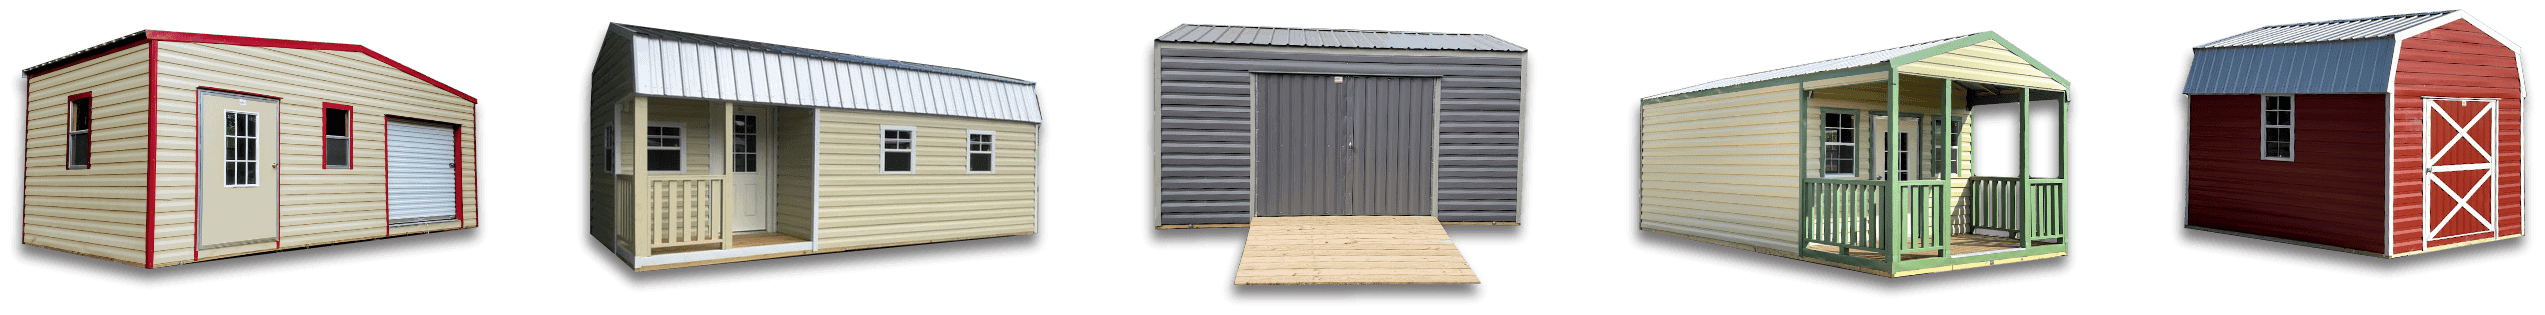 20x24 Portable Storage Sheds for Sale - Affordable Shed Styles | Robin Sheds